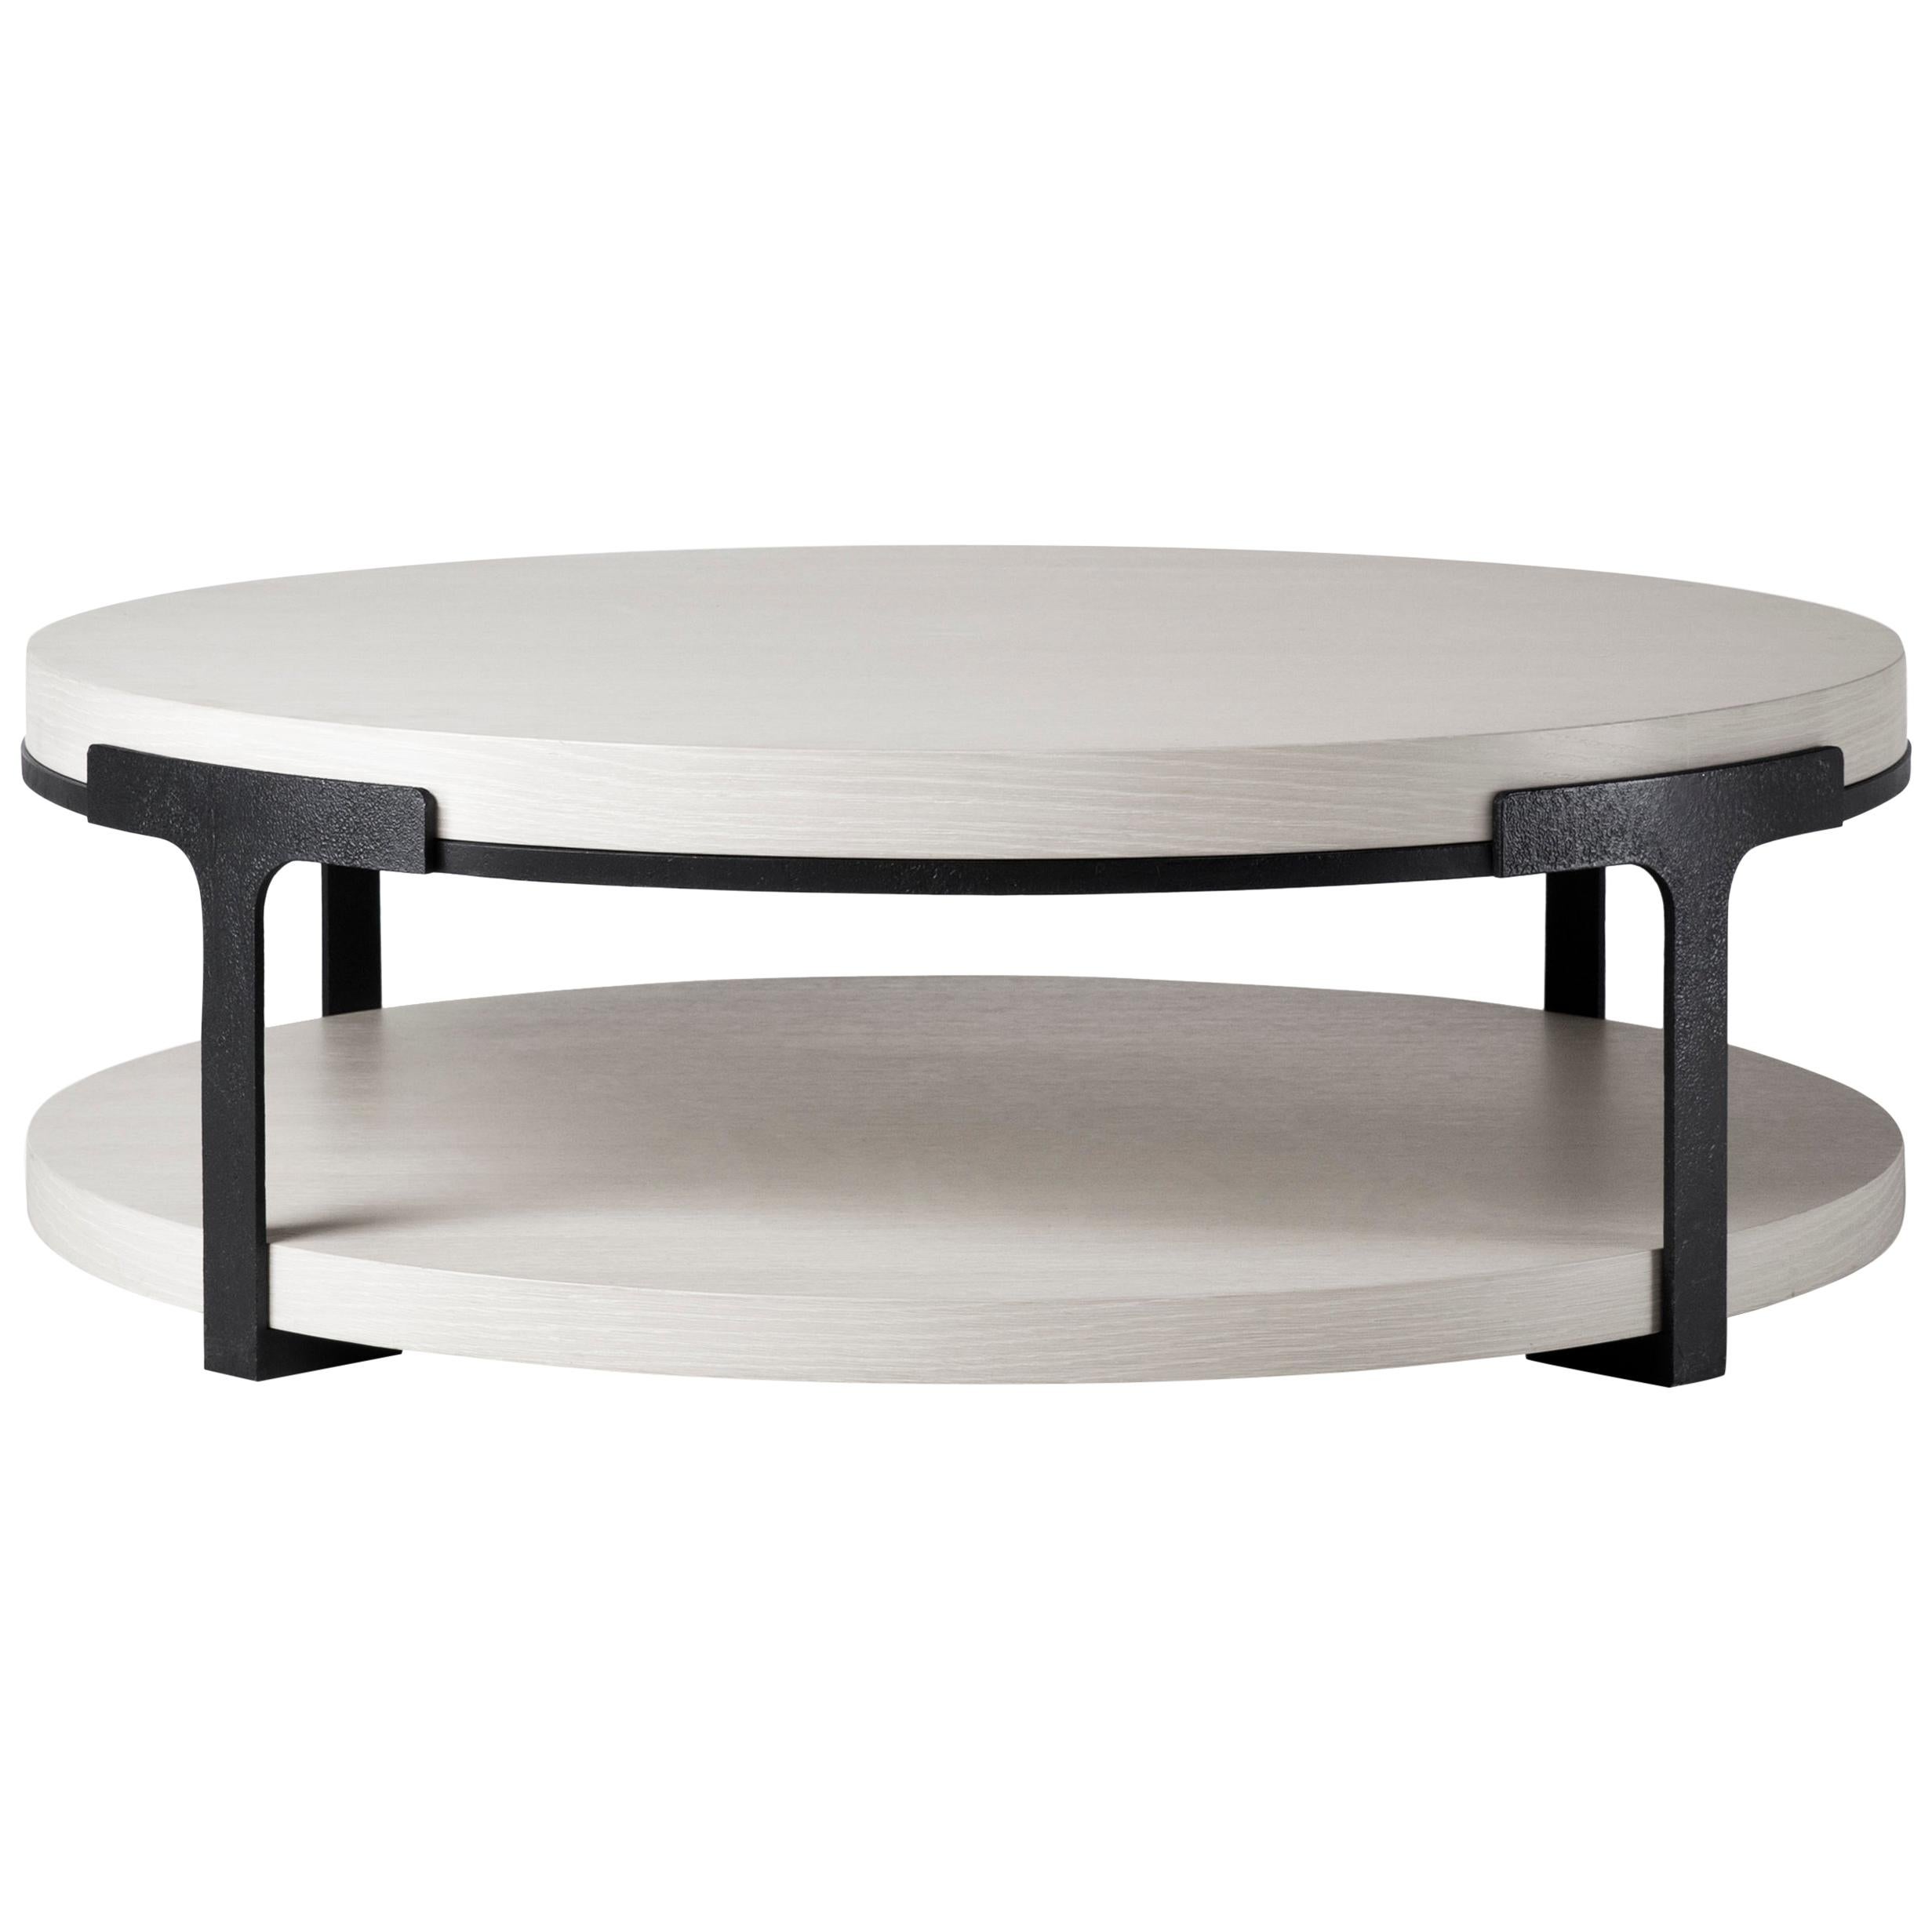 HOLLY HUNT Tudor Round Cocktail Table with Oak Alpine Top and Metal Base